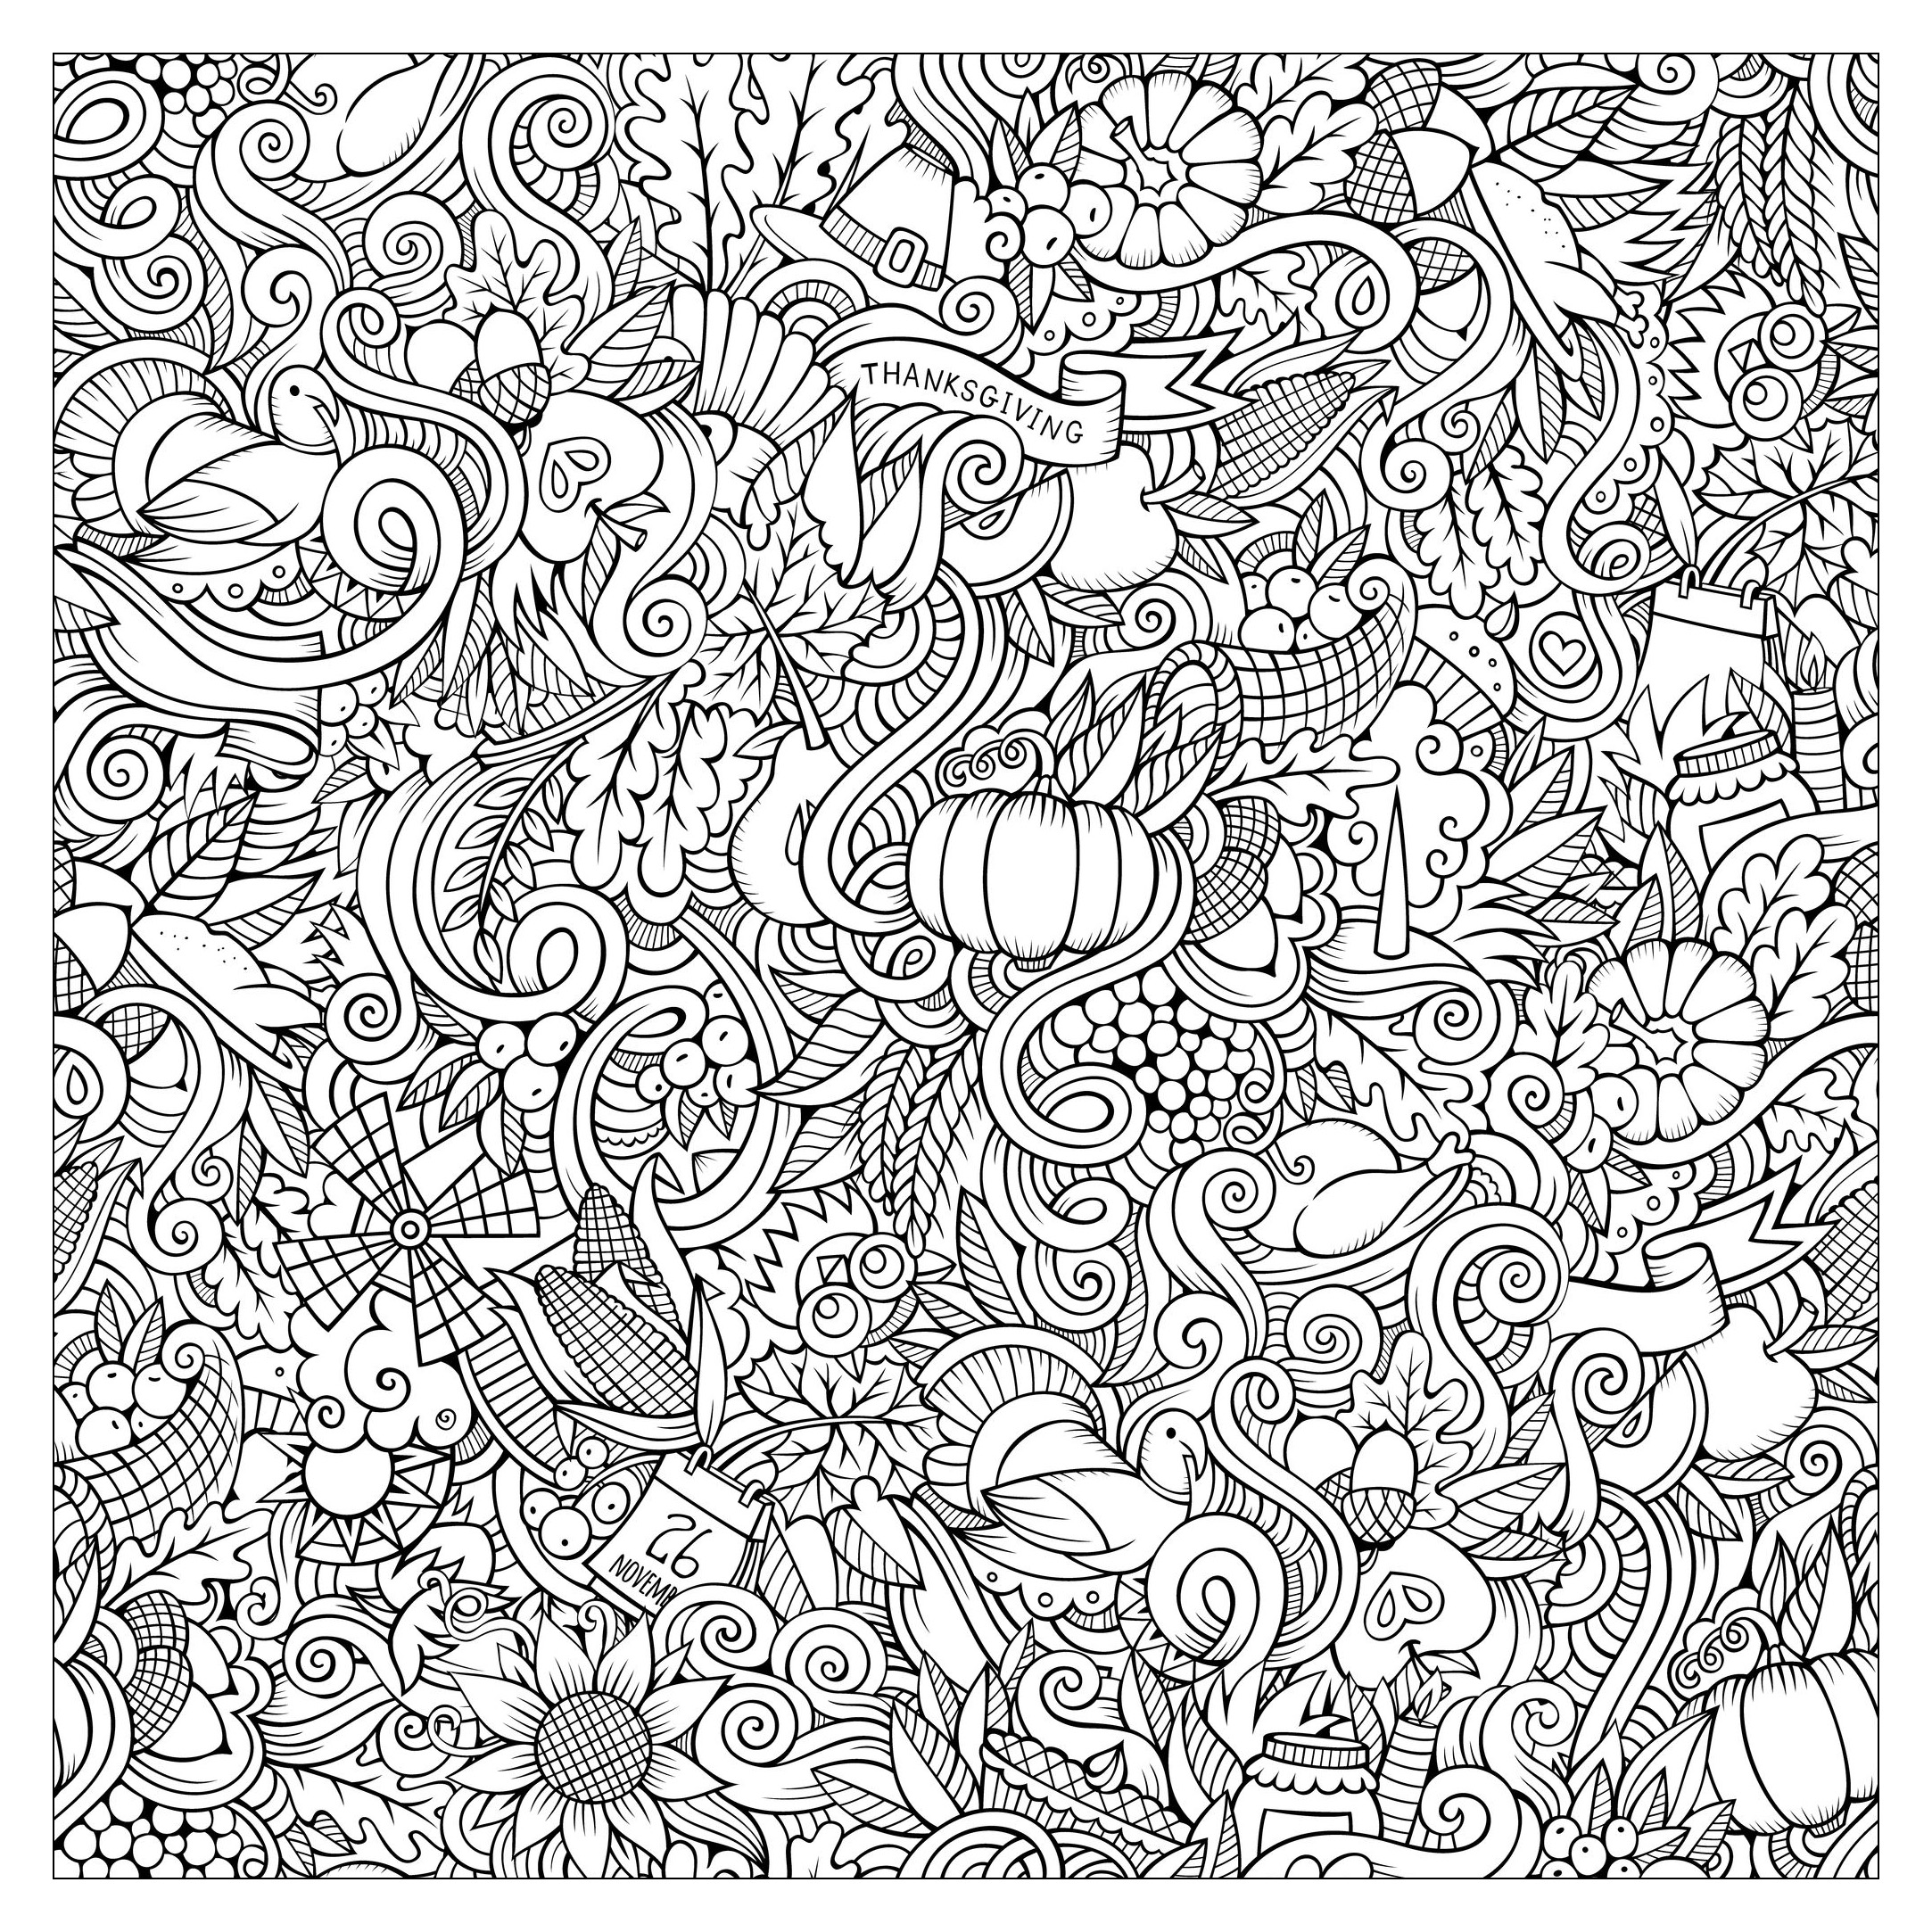 Thanksgiving Coloring Page For Adults